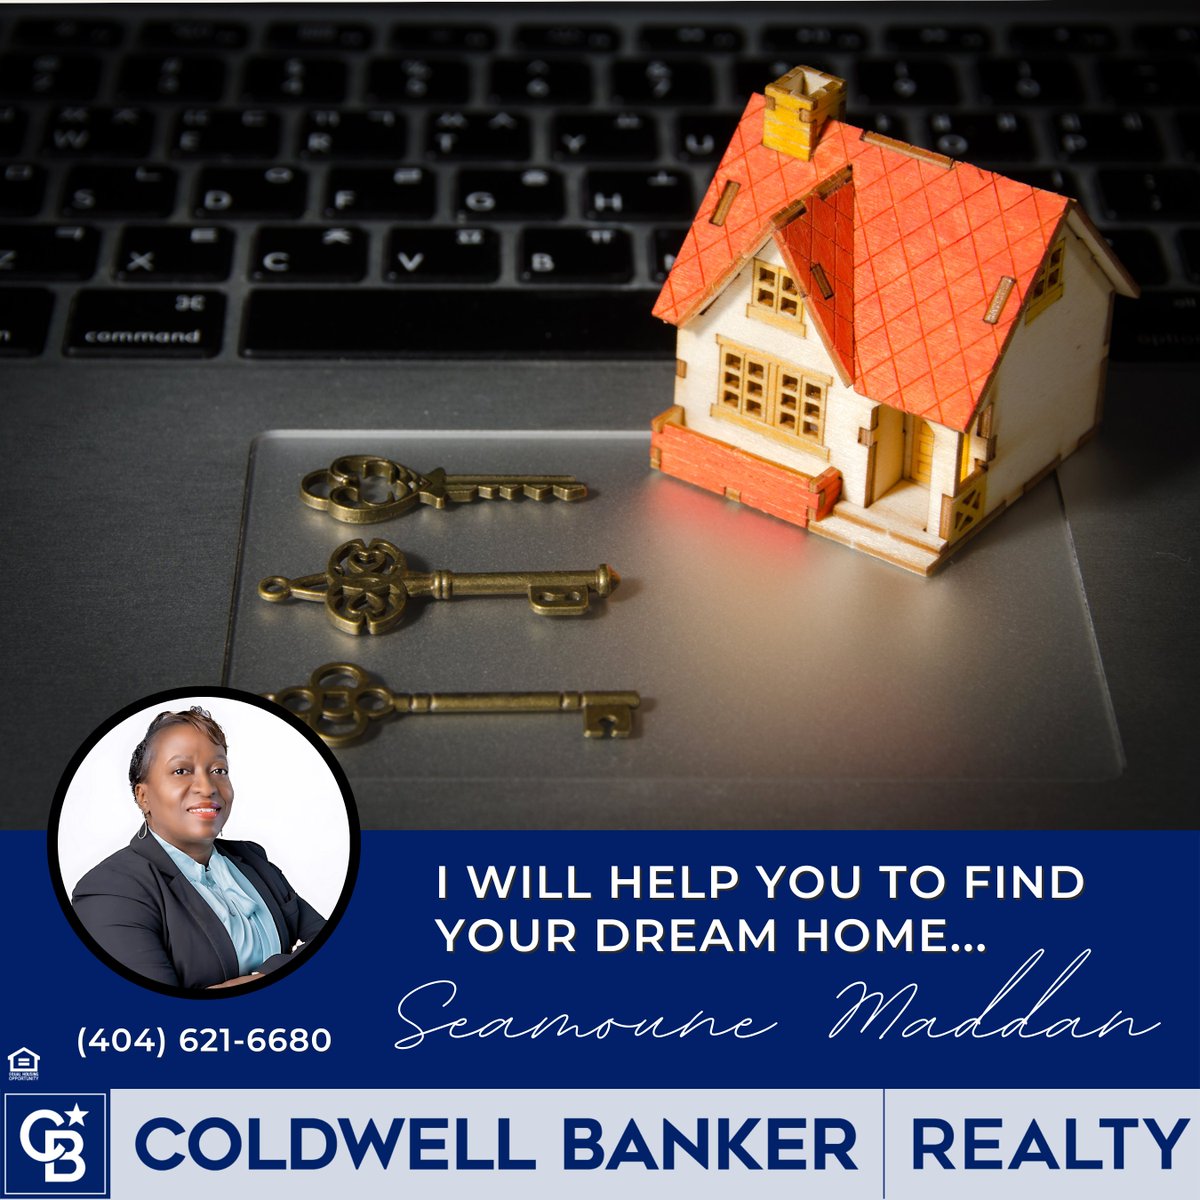 Ready to embark on a homebuying journey?  Let me be your trusted partner in finding the ideal home that meets your needs and aspirations. From the initial search to closing the deal, I've got you covered. Contact me today and let's make your dreams come true!  #DreamHomeAwaits